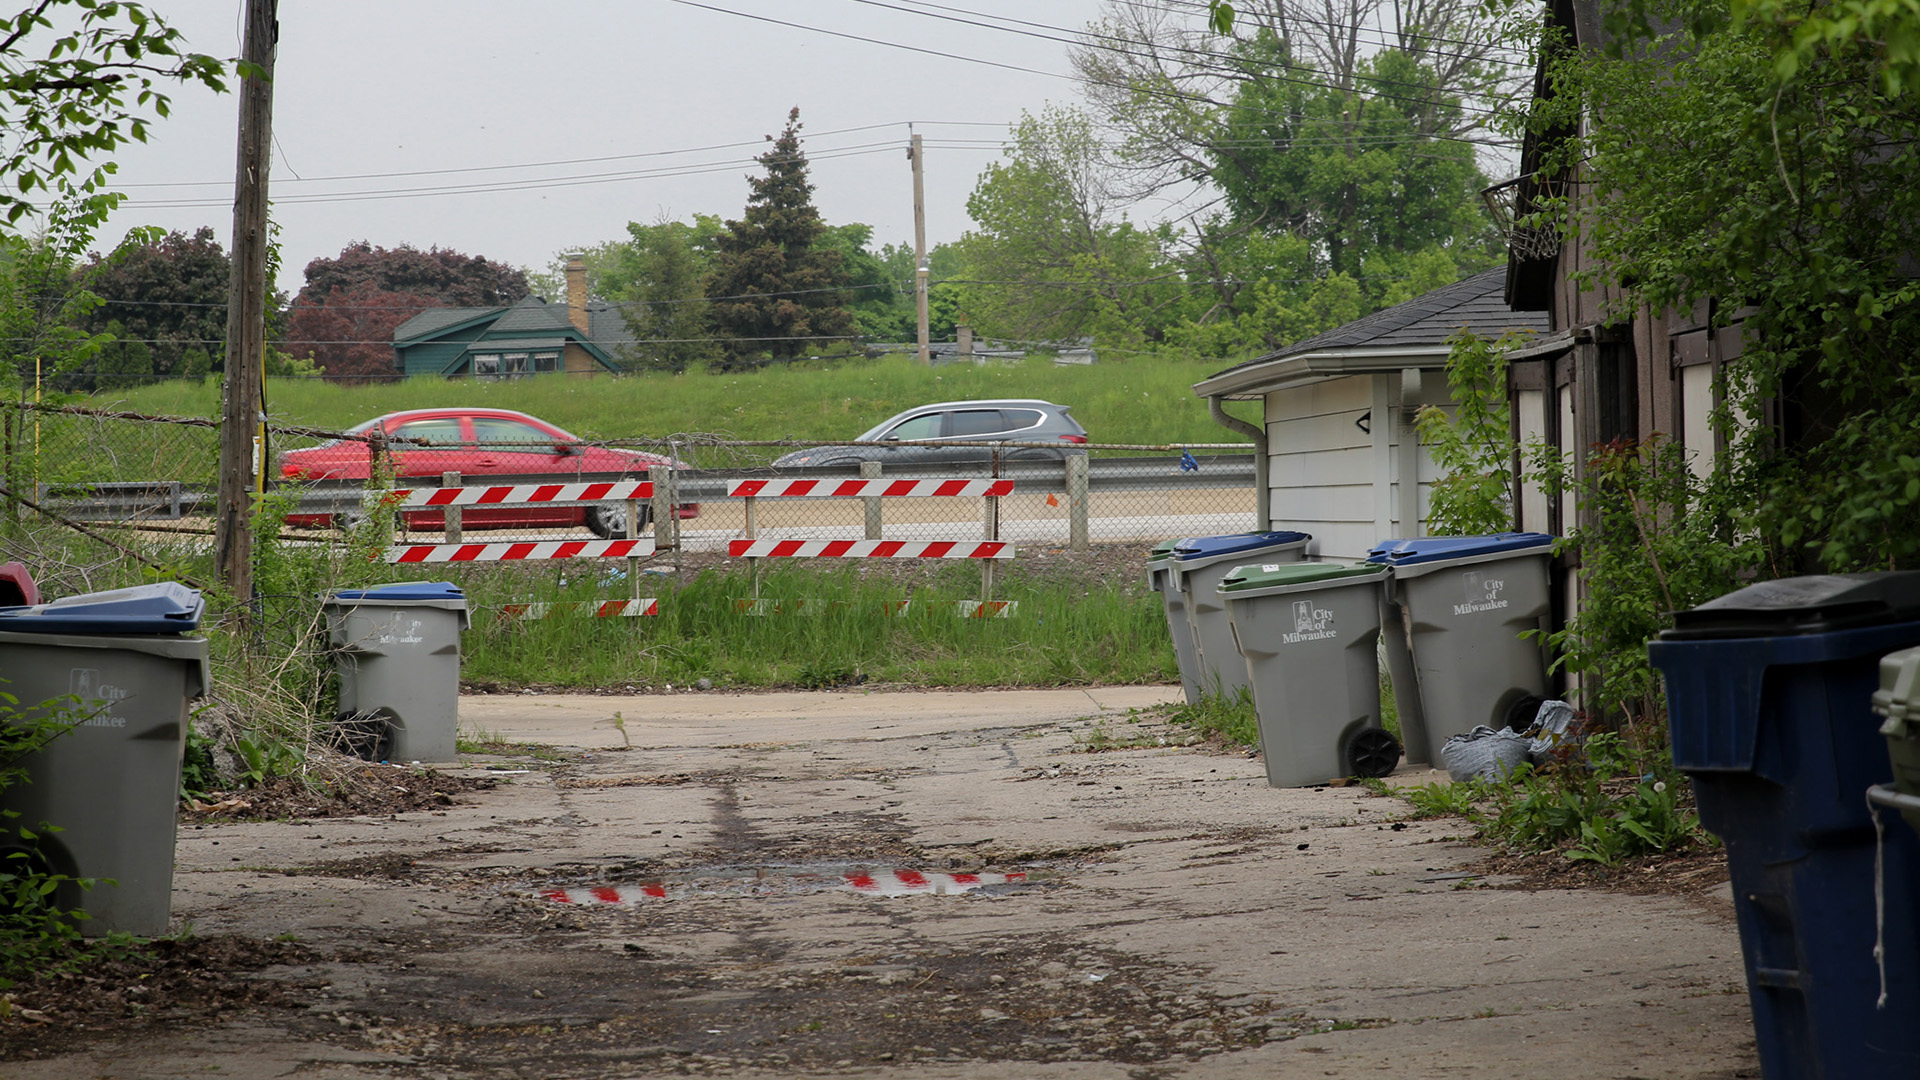 Cars drive on a highway just past the end of an alley lined with trash and recycling receptacles placed outside of residential garages and houses.